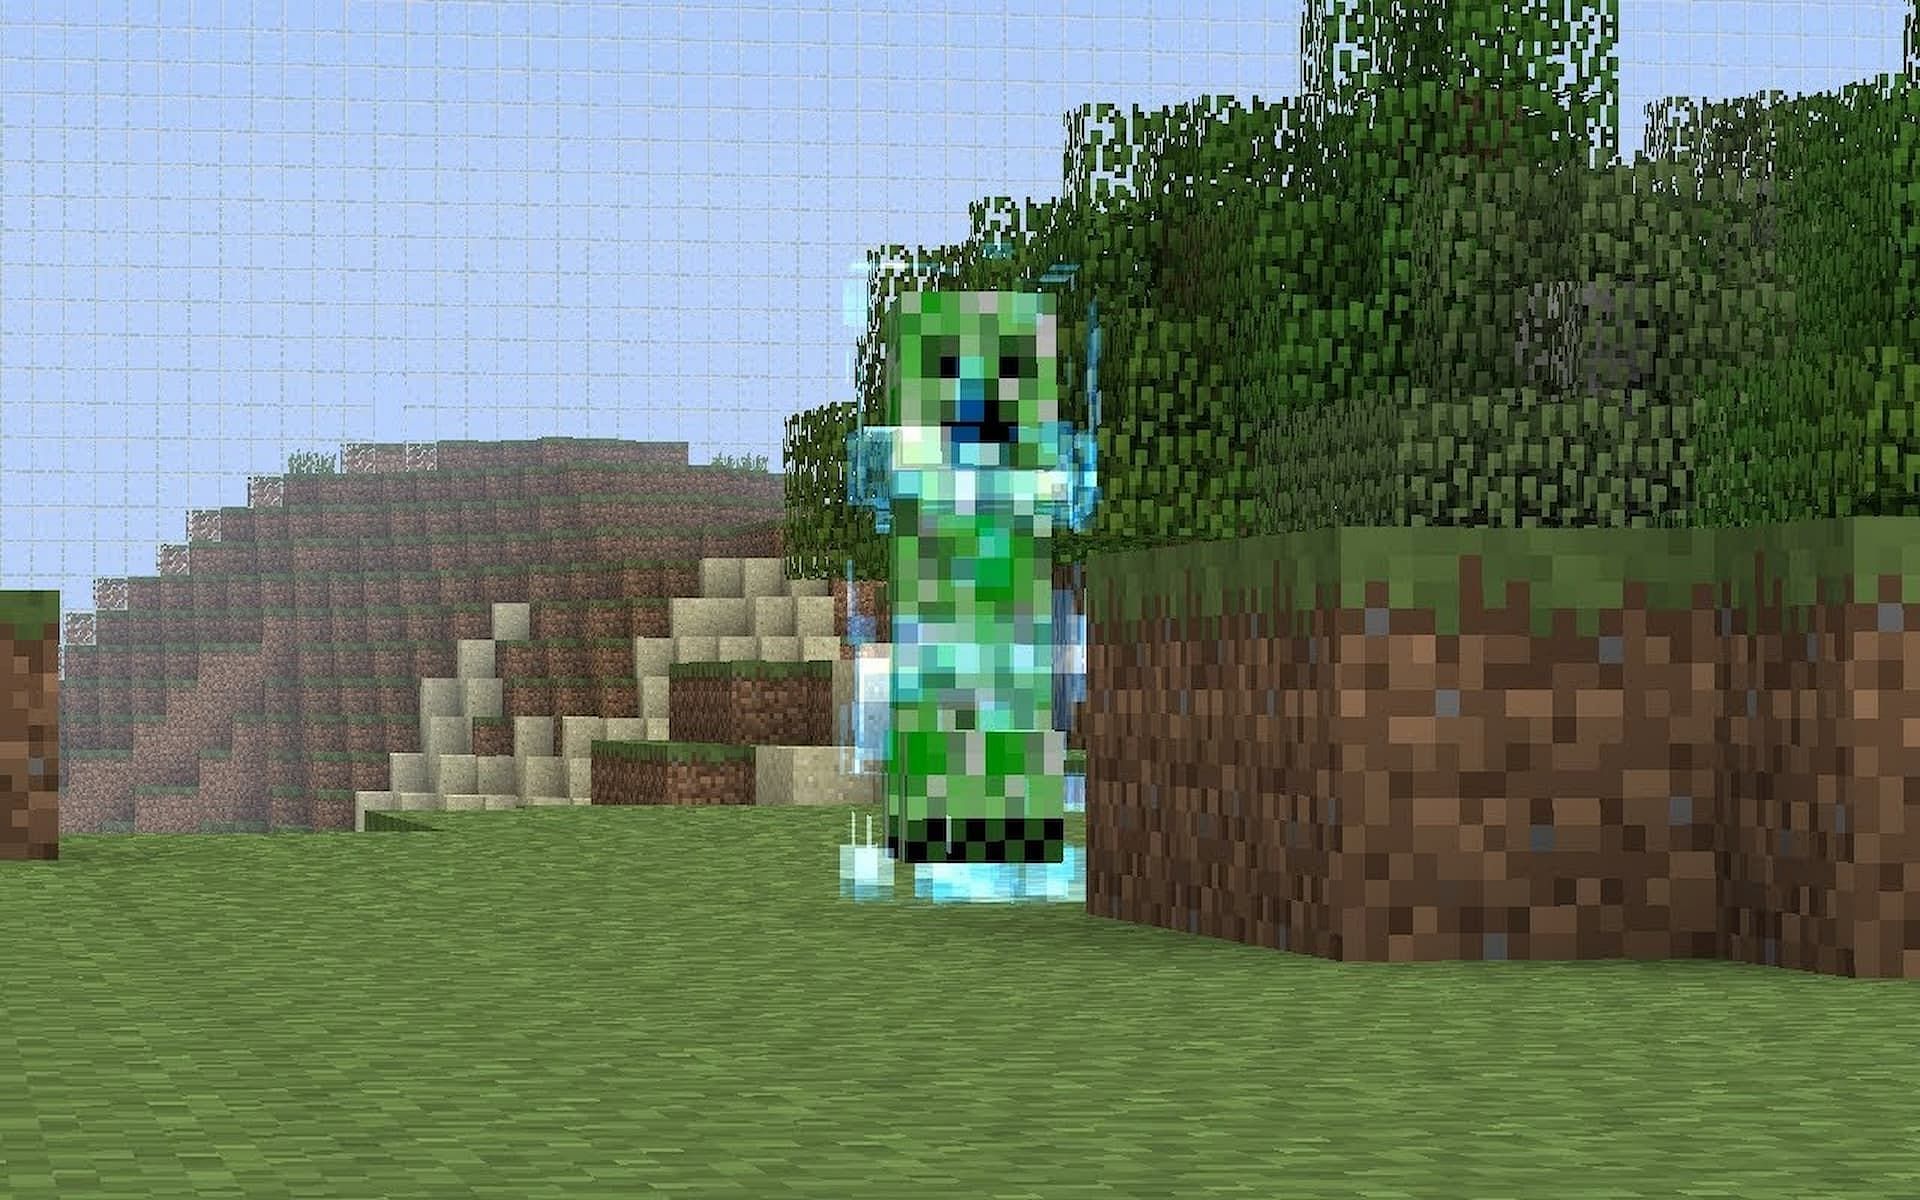 Creeper - What is a creeper in Minecraft?